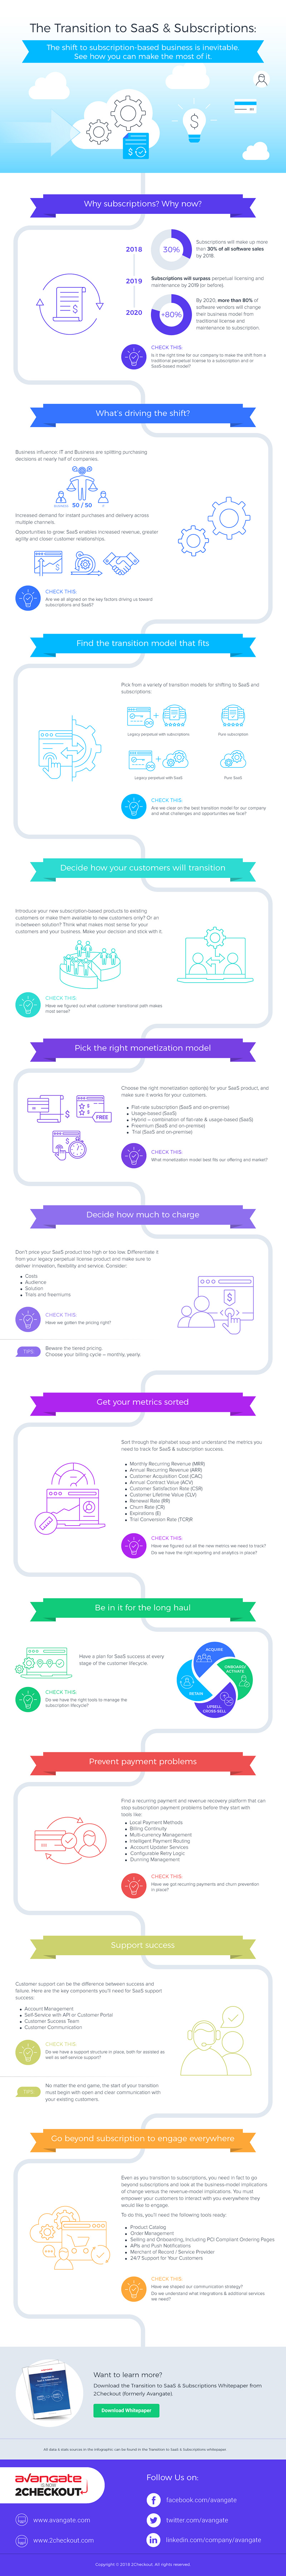 transition-to-saas-infographic